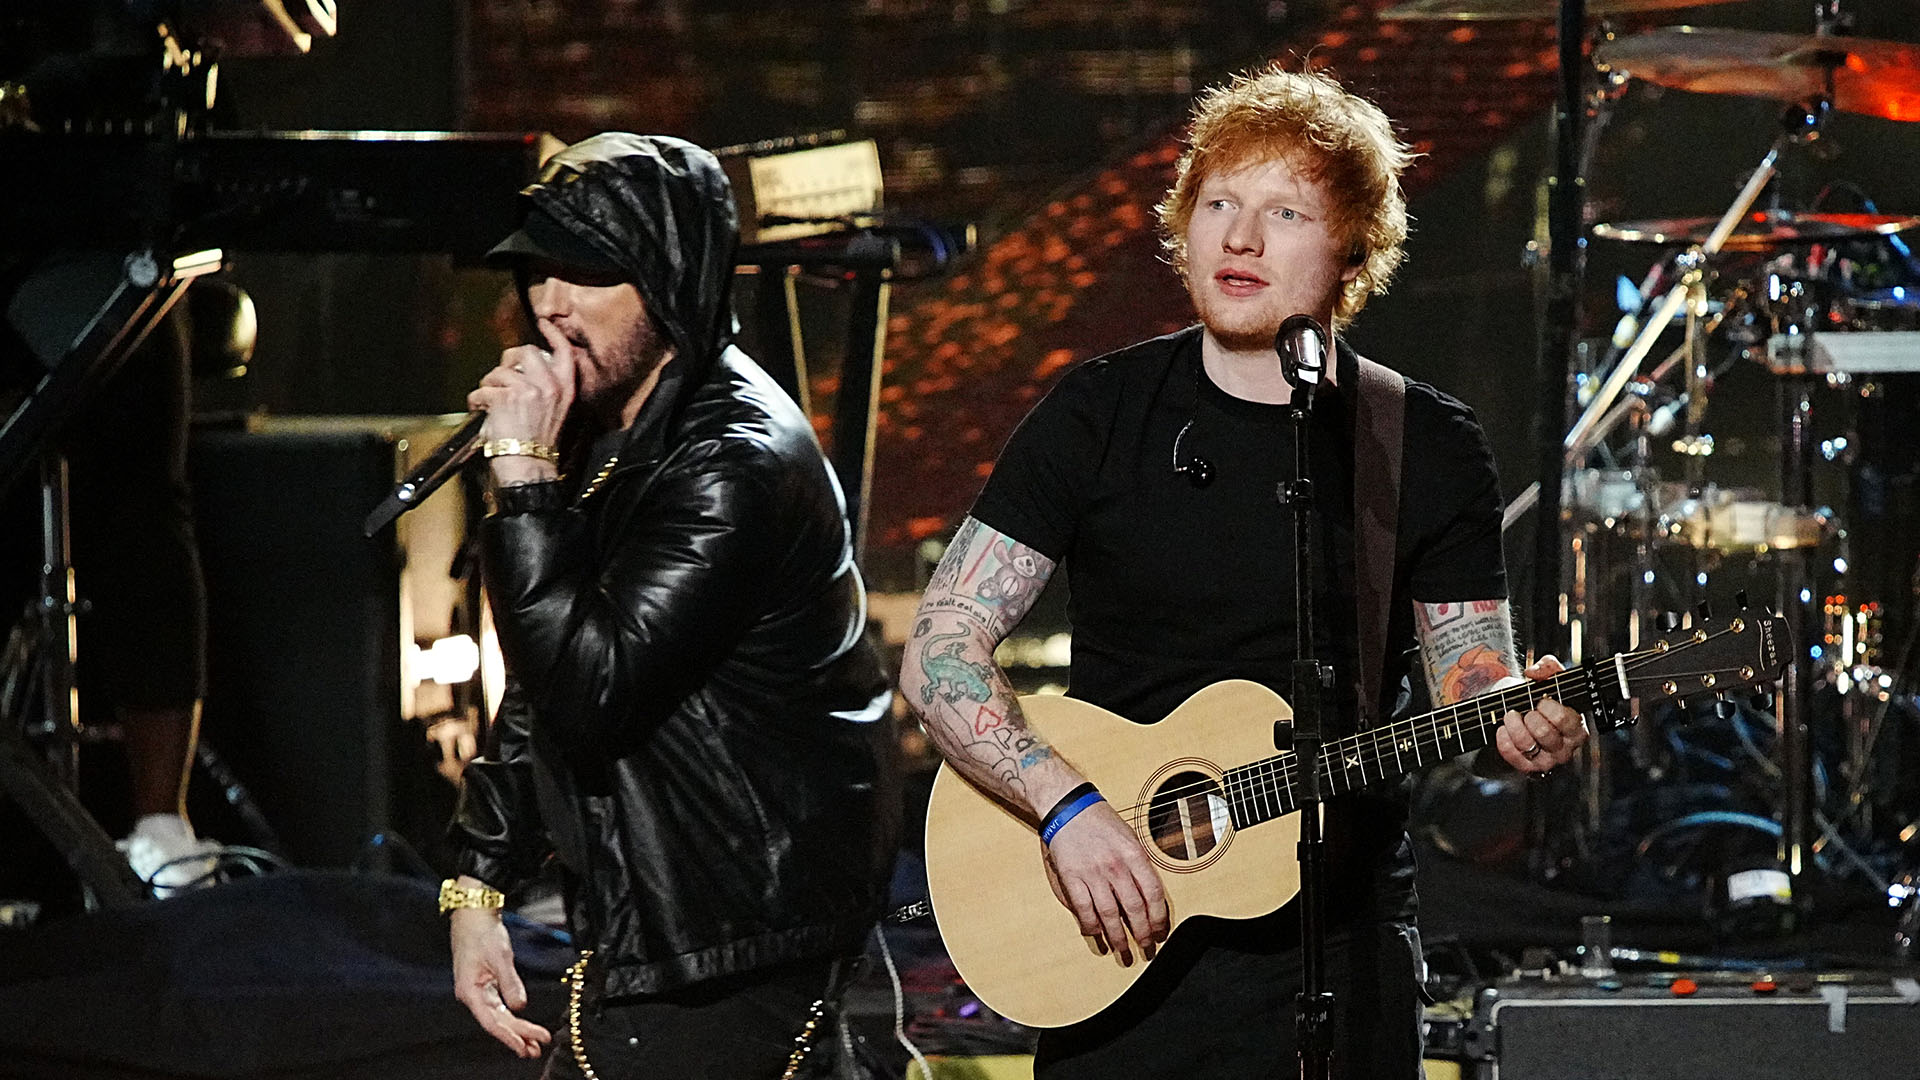 Inductee Eminem and Ed Sheeran perform on stage during the 37th Annual Rock & Roll Hall Of Fame Induction Ceremony at Microsoft Theater on November 05, 2022 in Los Angeles, California.